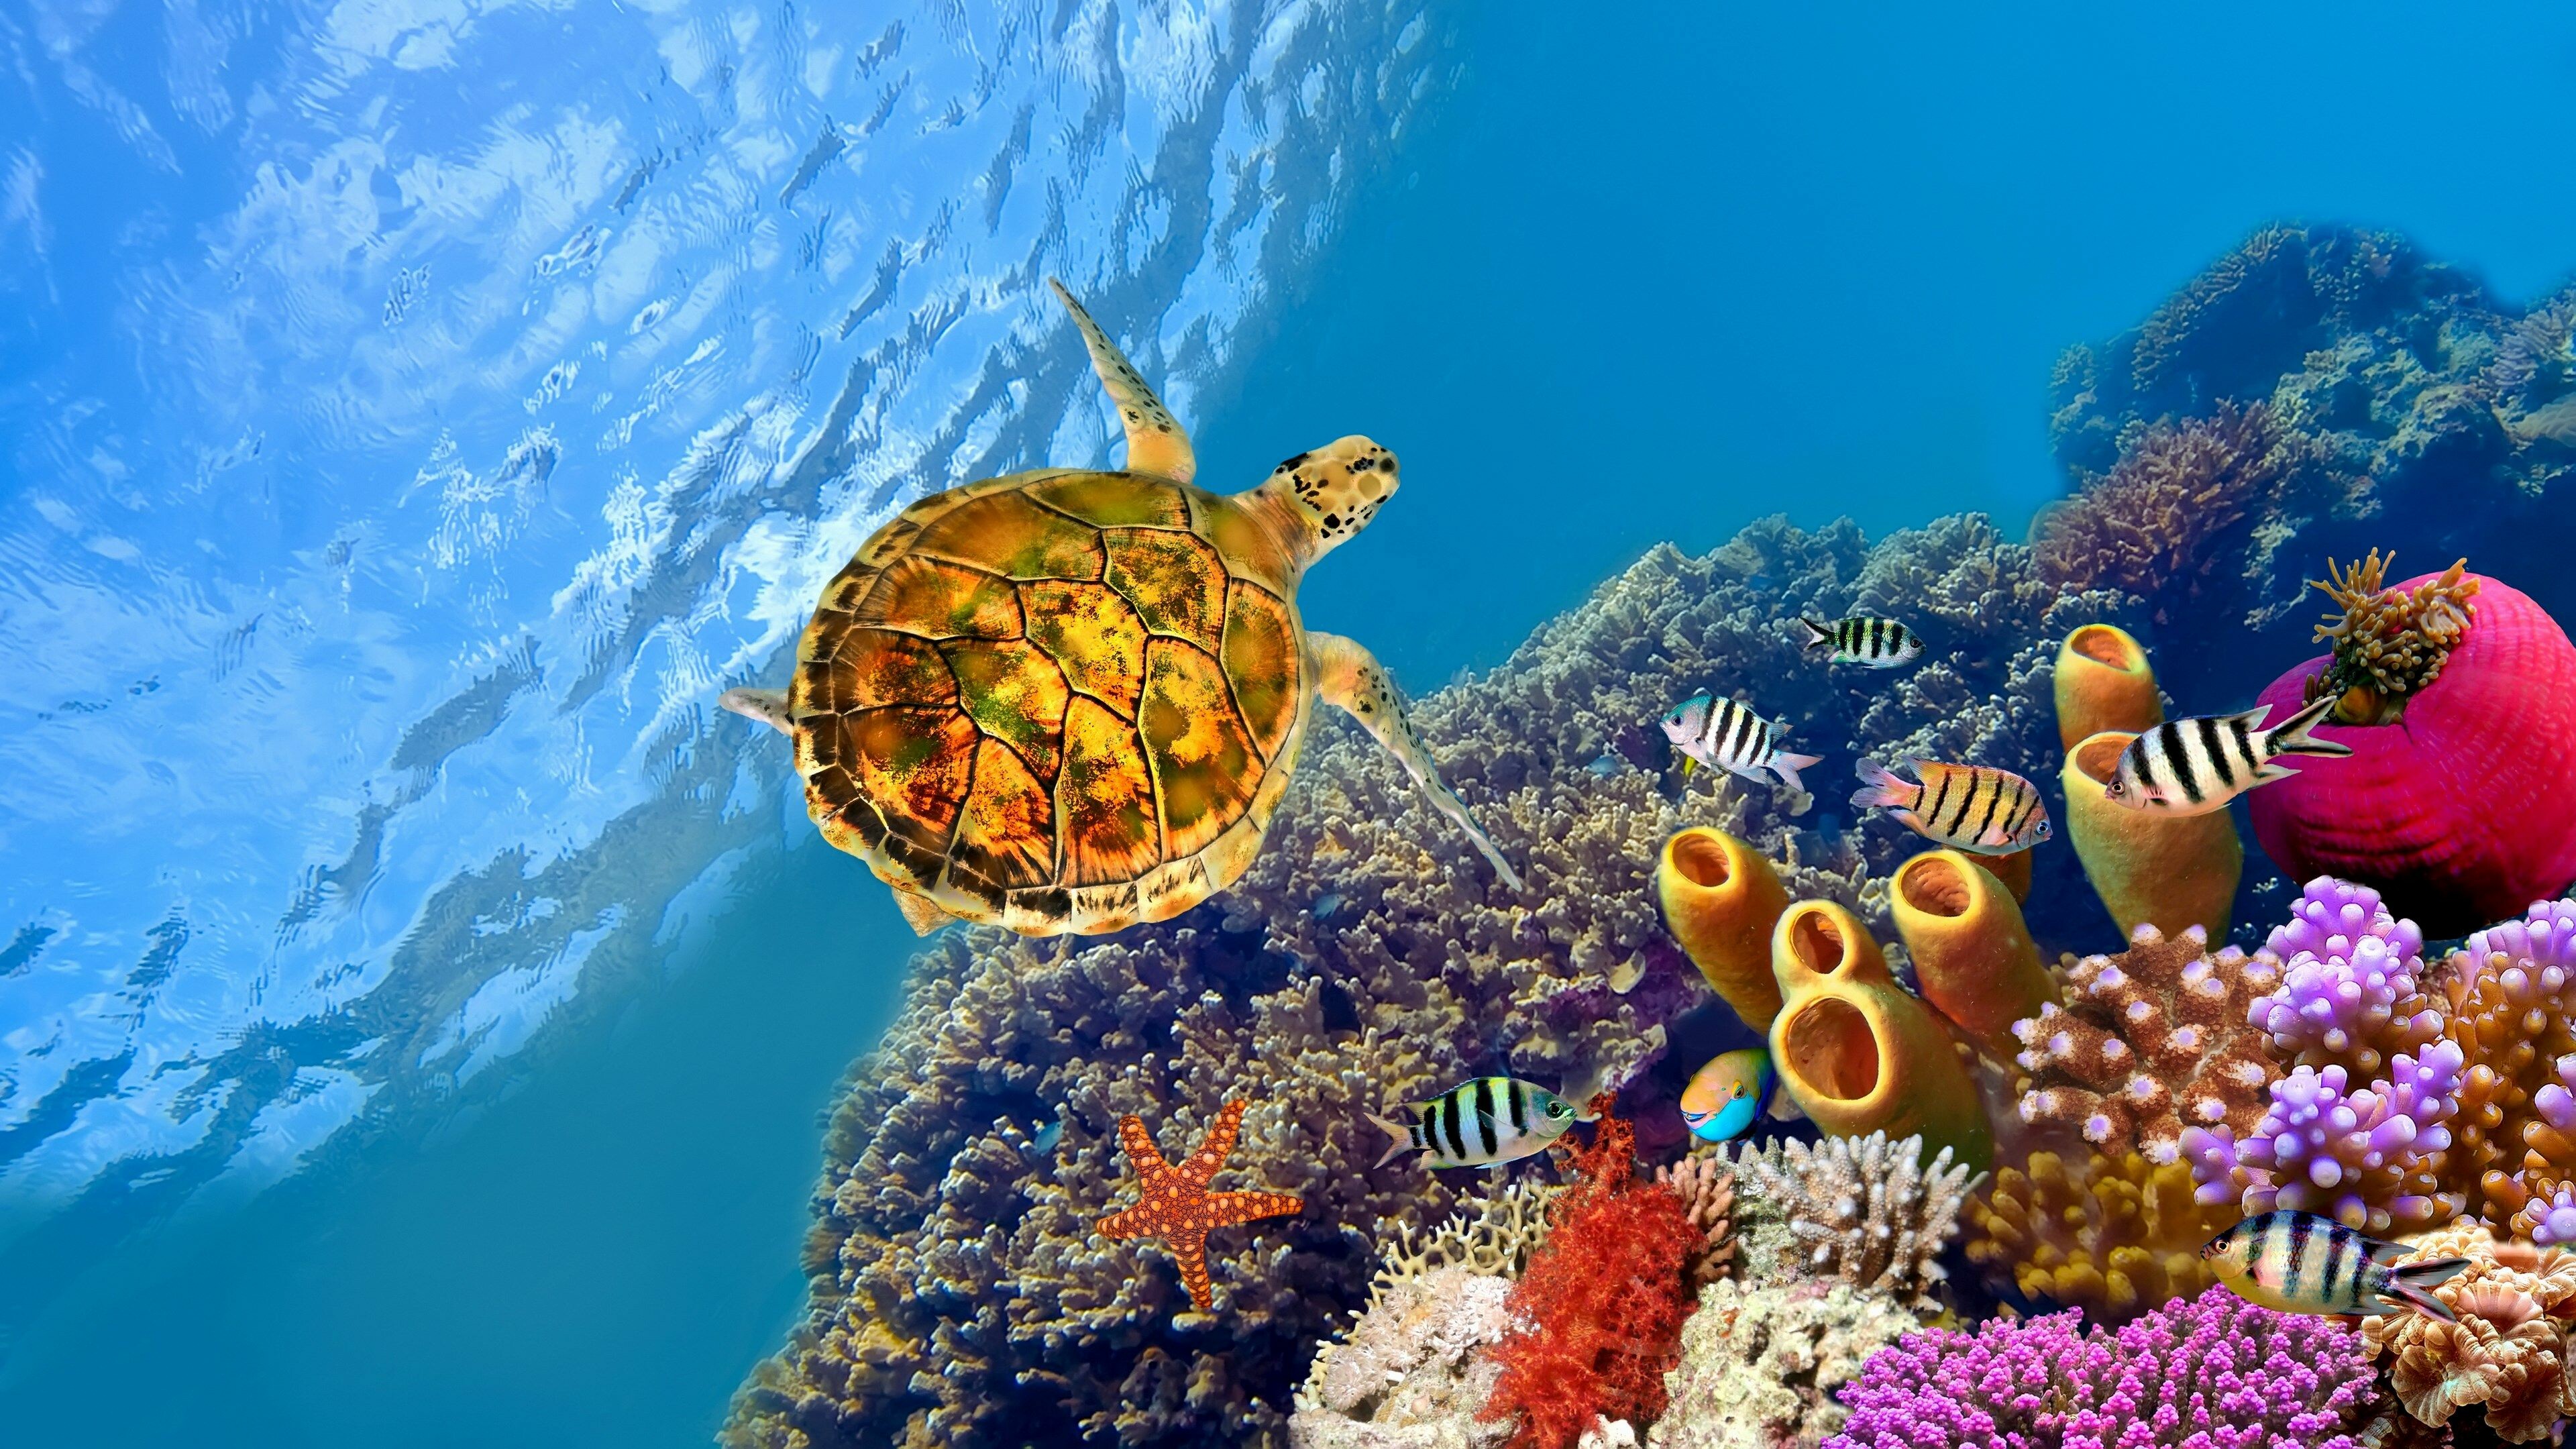 Great Barrier Reef: The world's largest coral reef system, Underwater ecosystem. 3840x2160 4K Background.